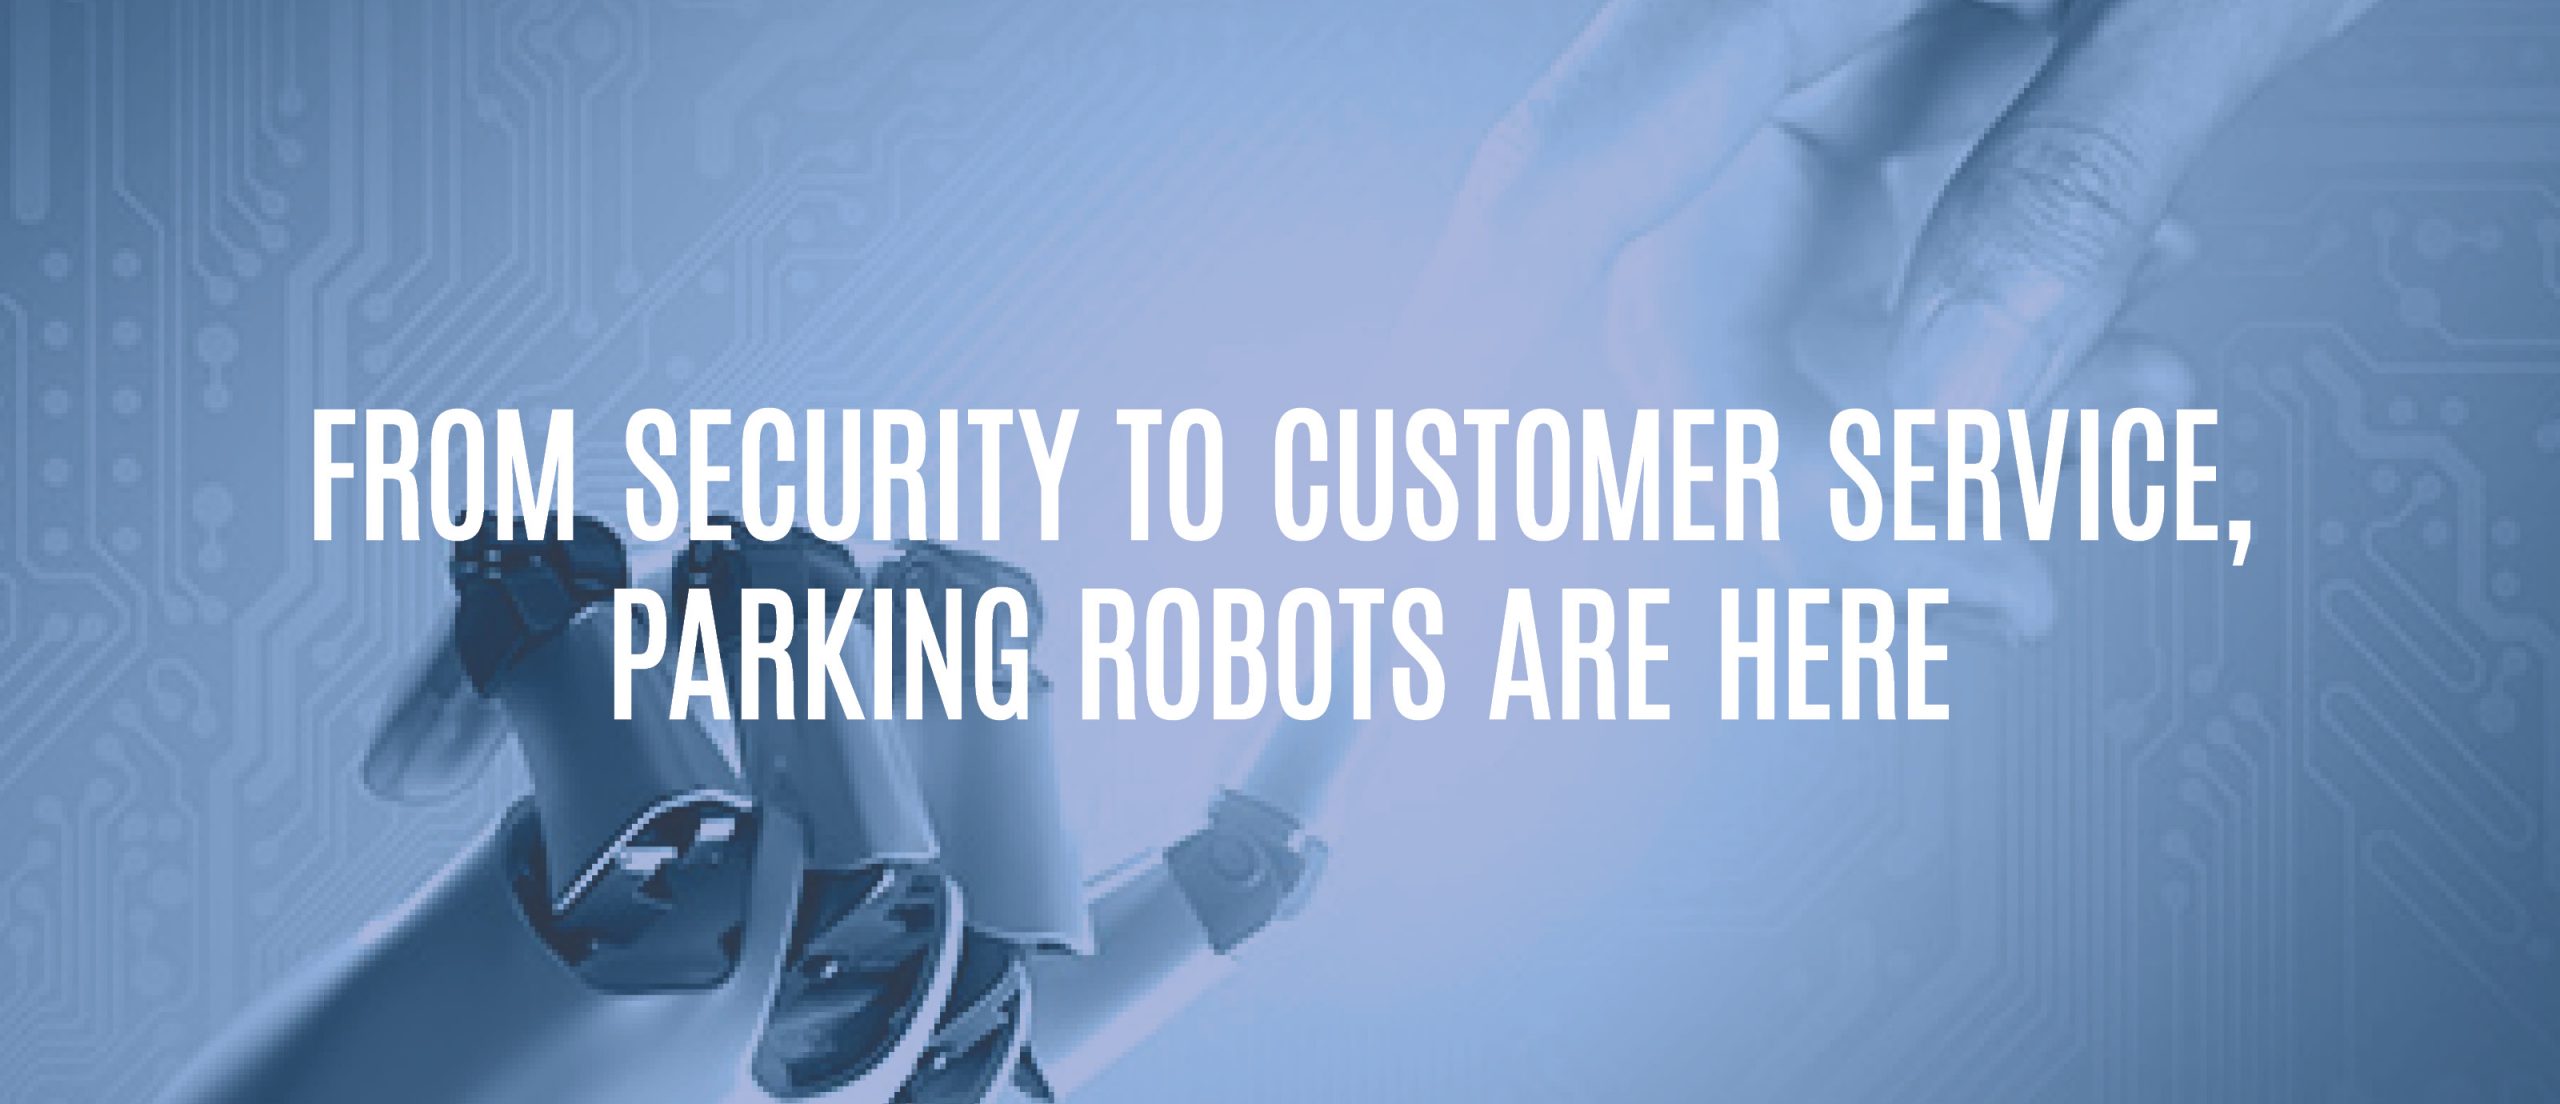 Blog Title - From security to customer service, parking robots are here